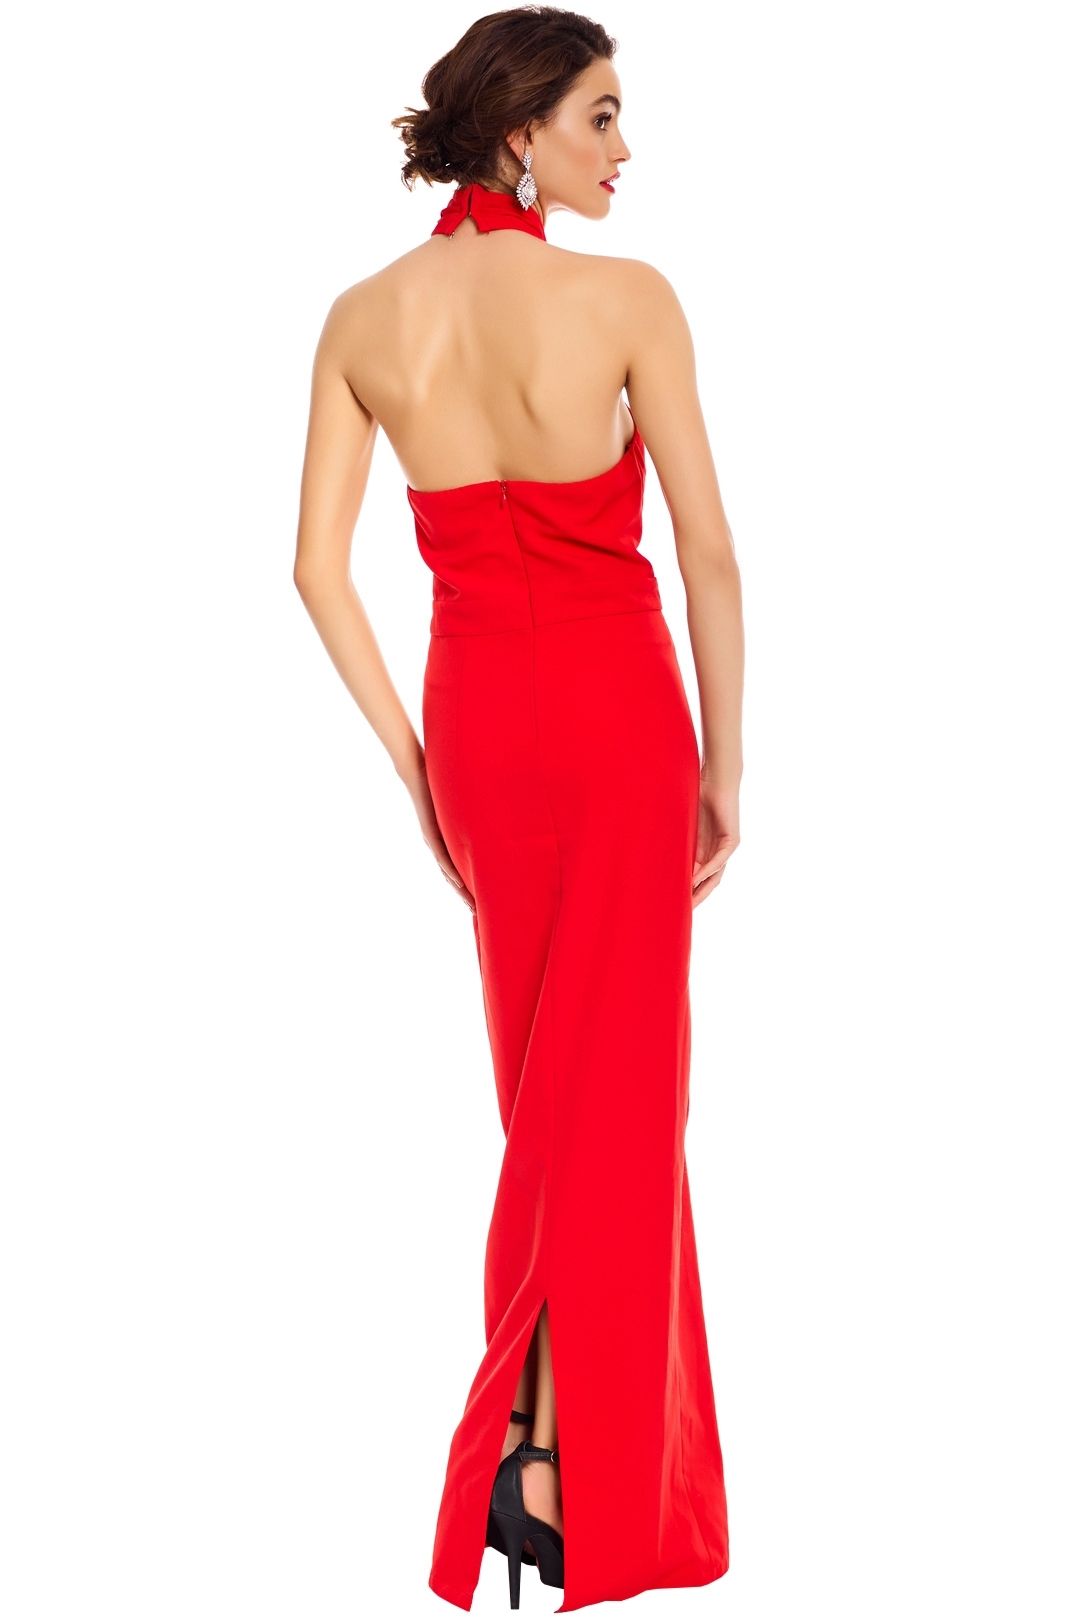 Elle Zeitoune - Winona Red Gown - Red - Back